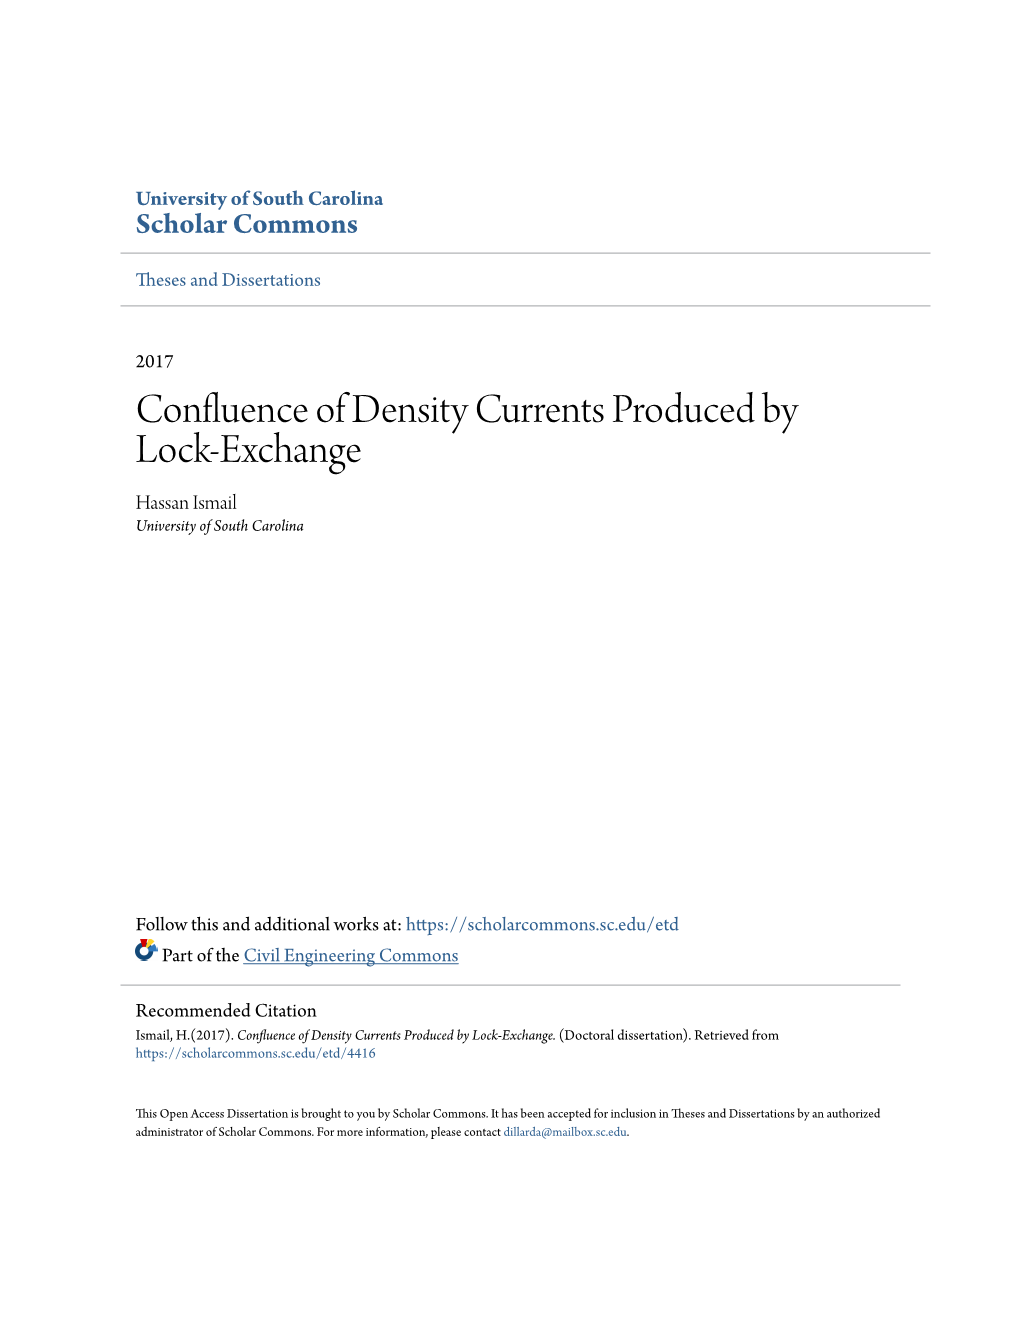 Confluence of Density Currents Produced by Lock-Exchange Hassan Ismail University of South Carolina